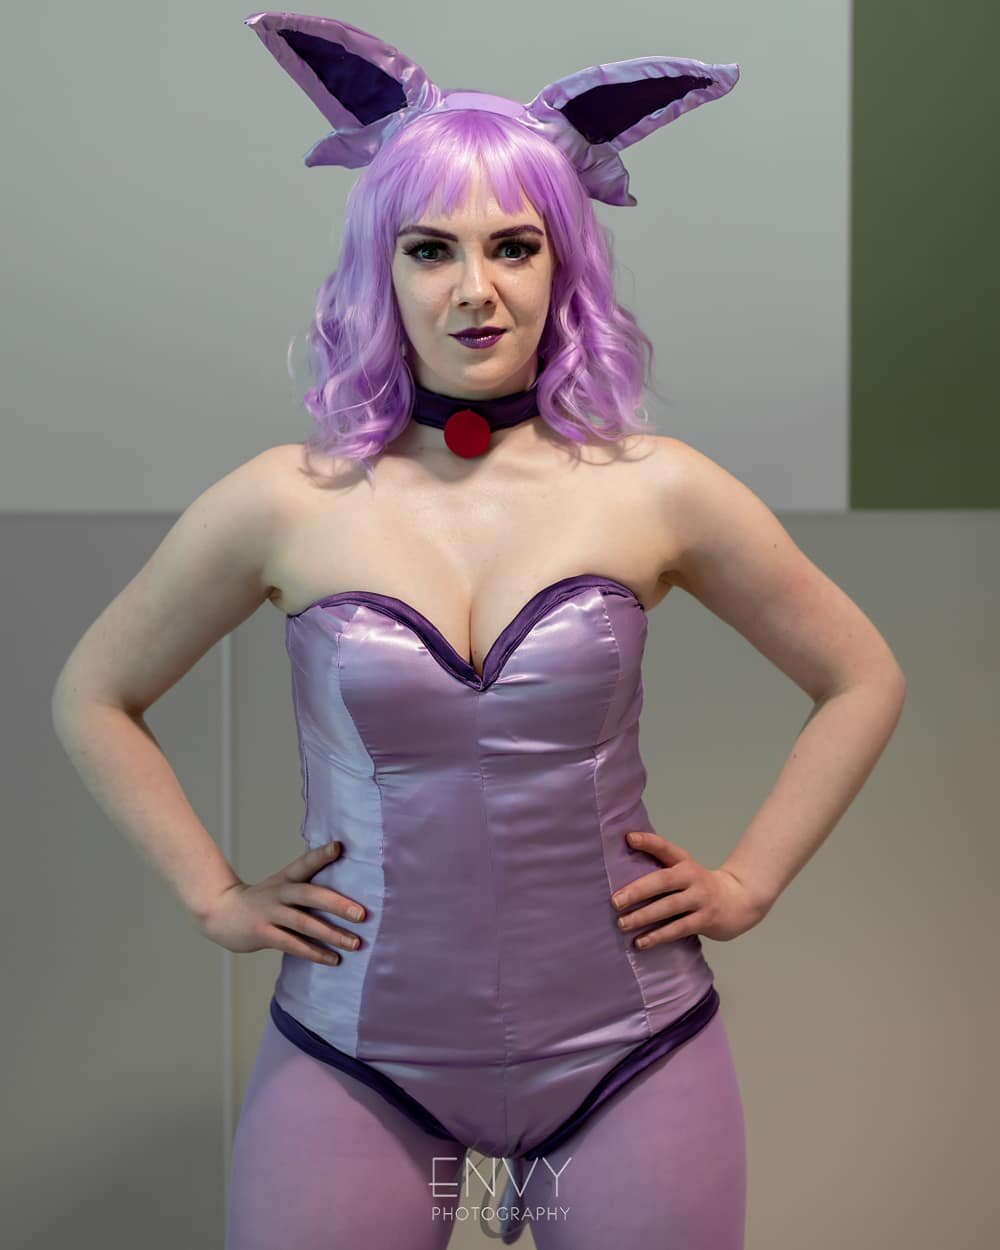 It's thought that Espeon is partly based upon the Nekomata - two-tailed Japanese demon cats who find great pleasure in causing chaos.
Photo by @envyphotography1
Espeon cosplay by @mish.mello.
.
.
#pokemoncosplay #espeon #espeoncosplay #bunnysuit #fan